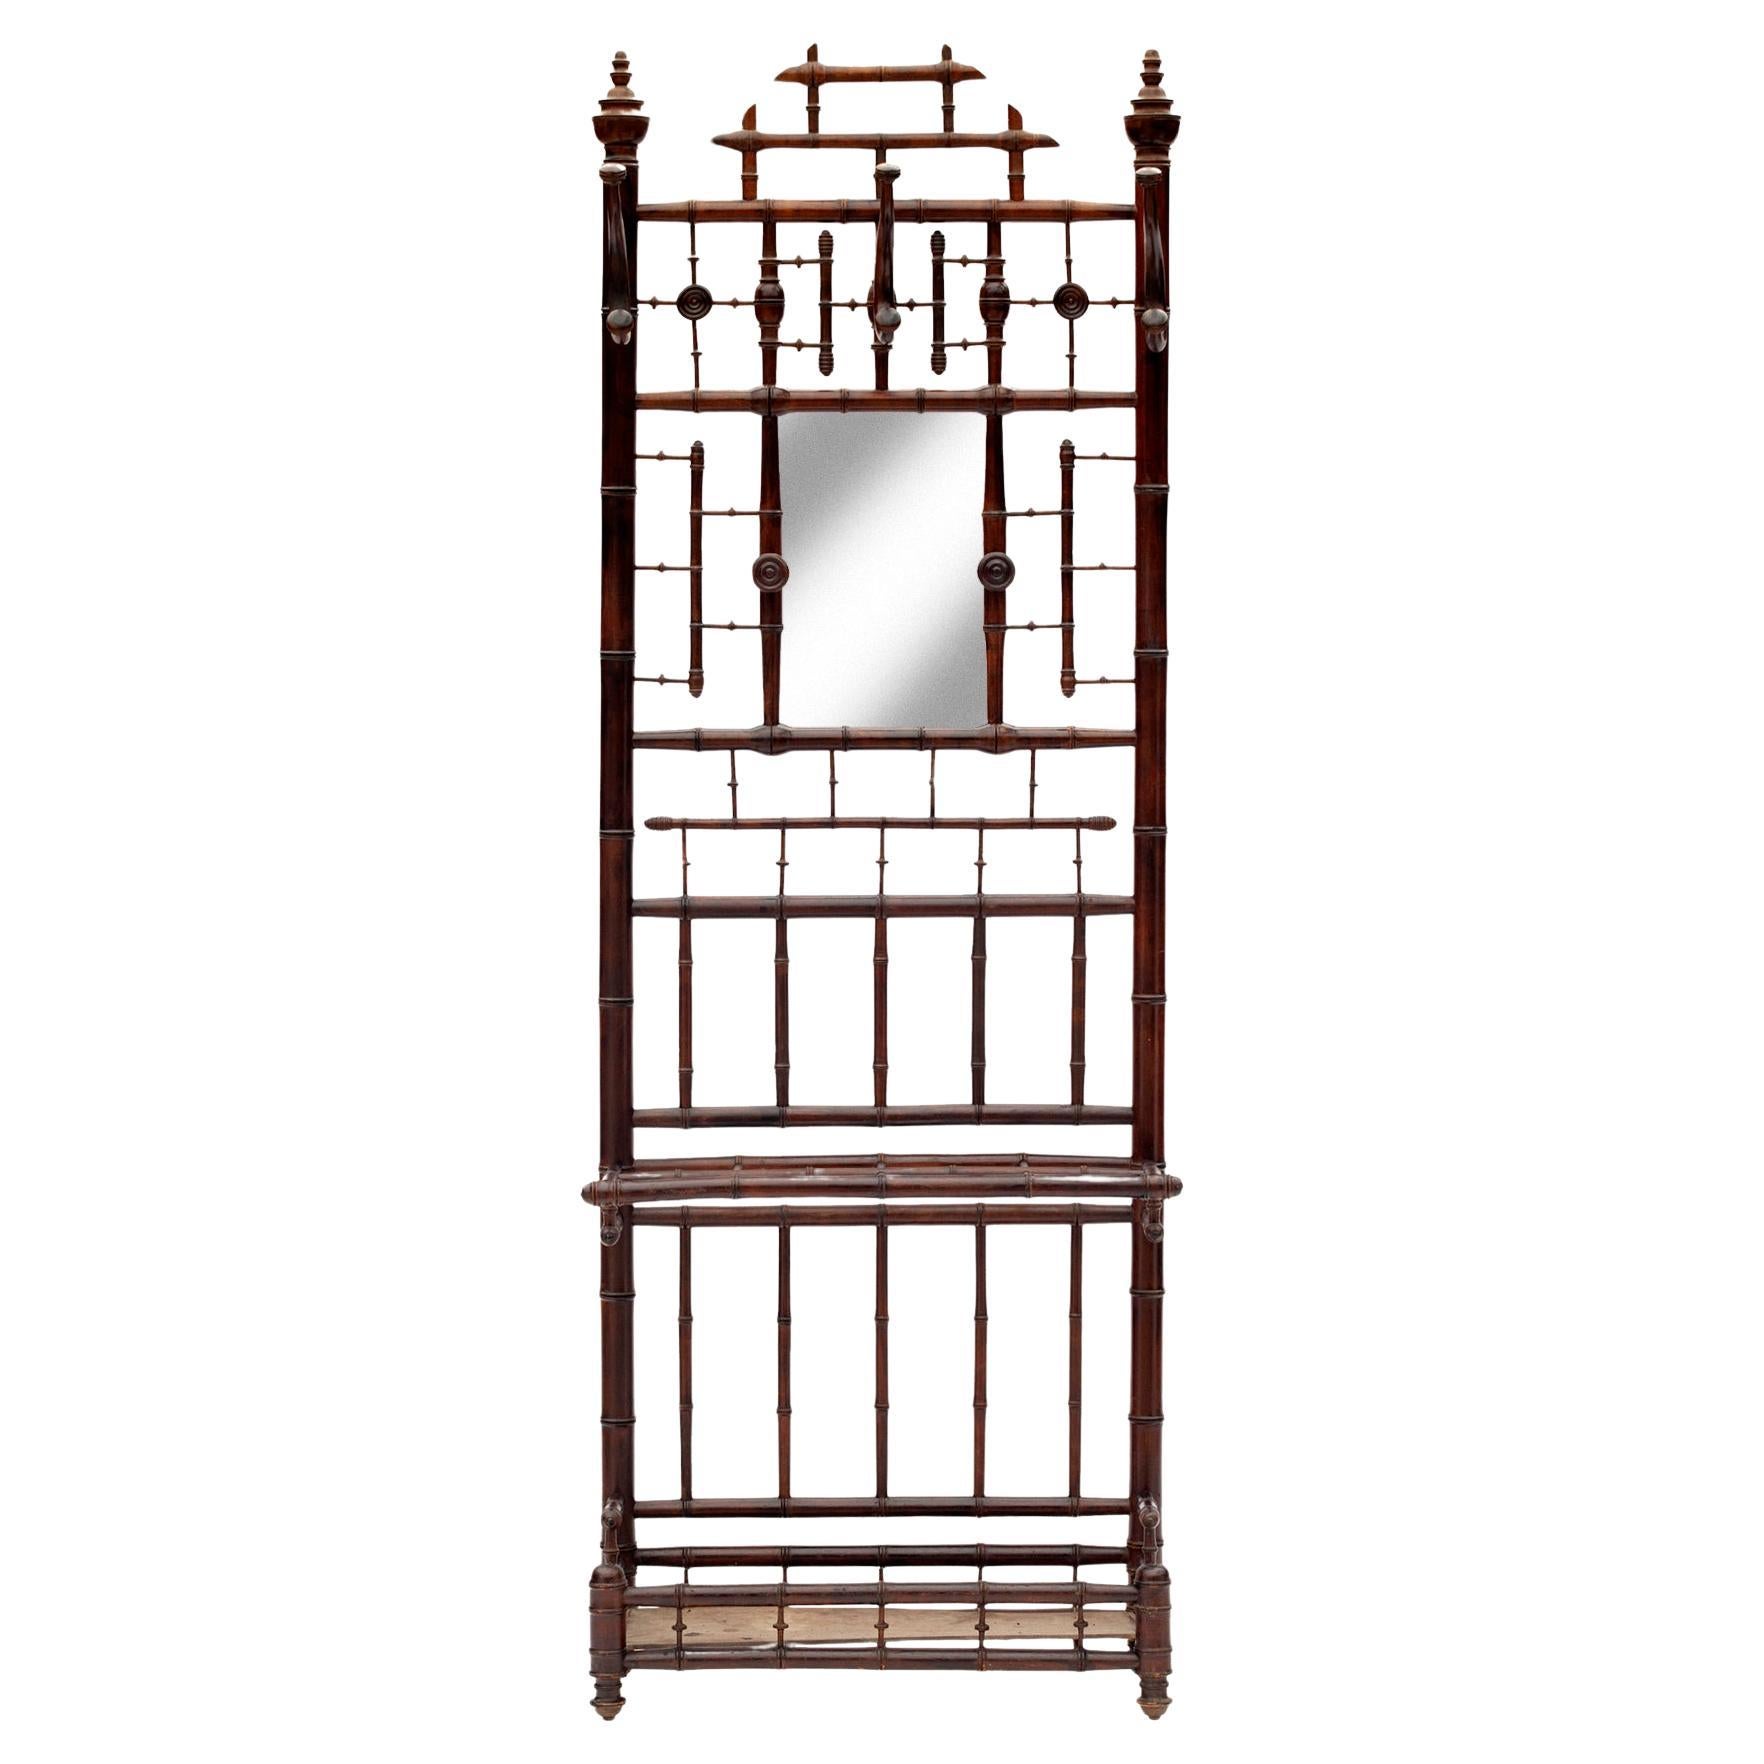 A superb French faux bamboo hallstand in hardwood.
Original bentwood hooks & hand turned knobs & umbrella drib tray.
Small mirror in the center. New mirror.\ed glass.
Made to accommodate coats hats & umbrellas with 3 large bentwood hooks & four